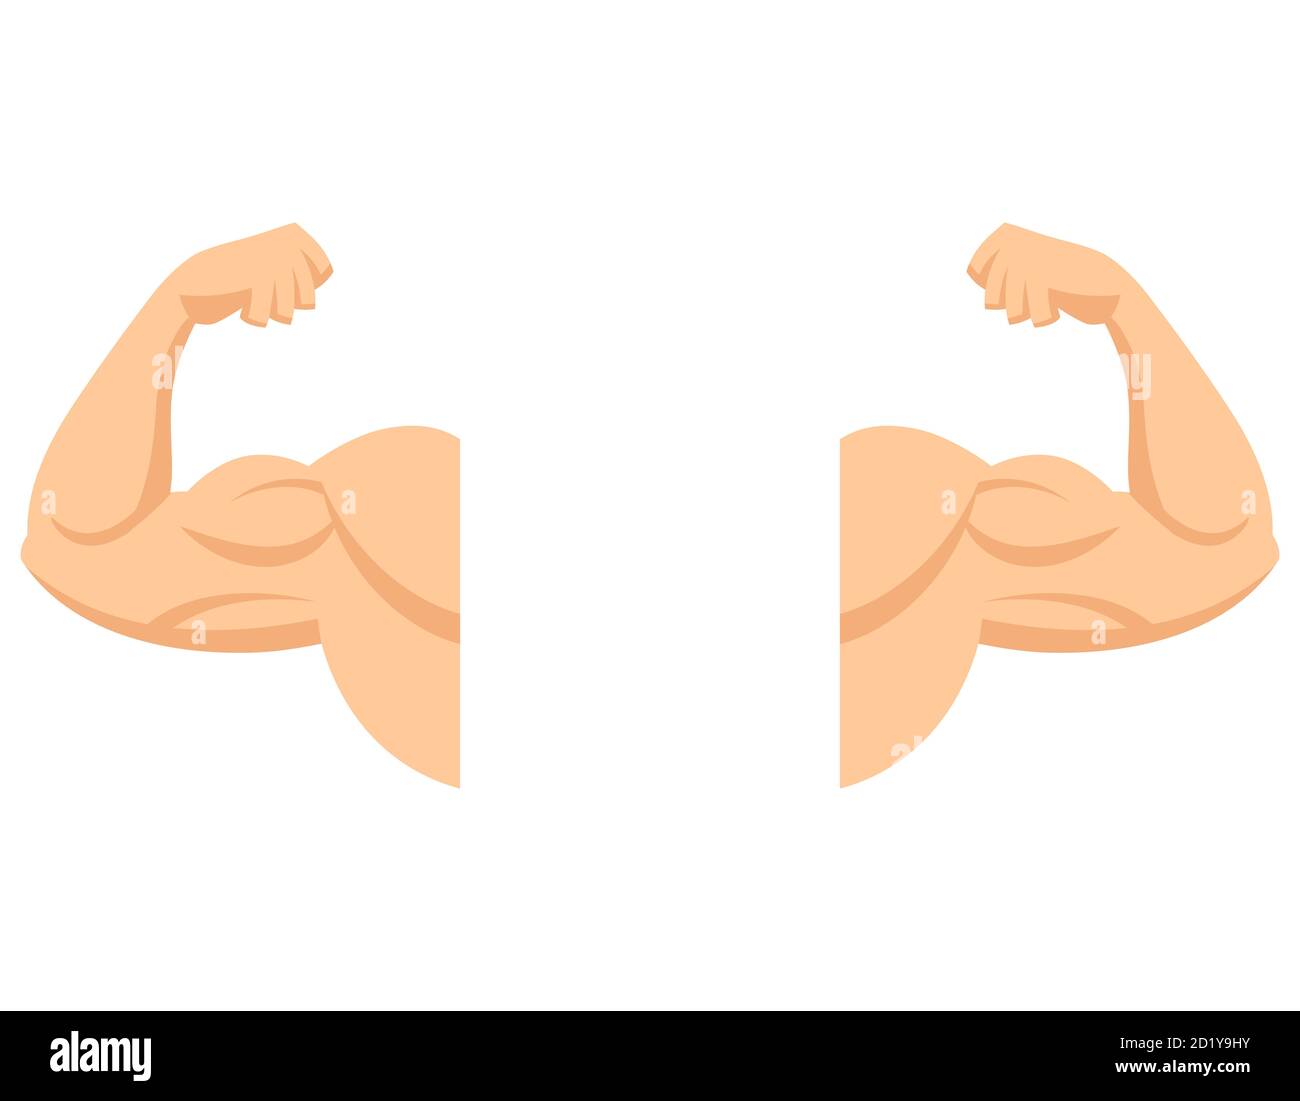 Strong arms Cut Out Stock Images & Pictures - Alamy